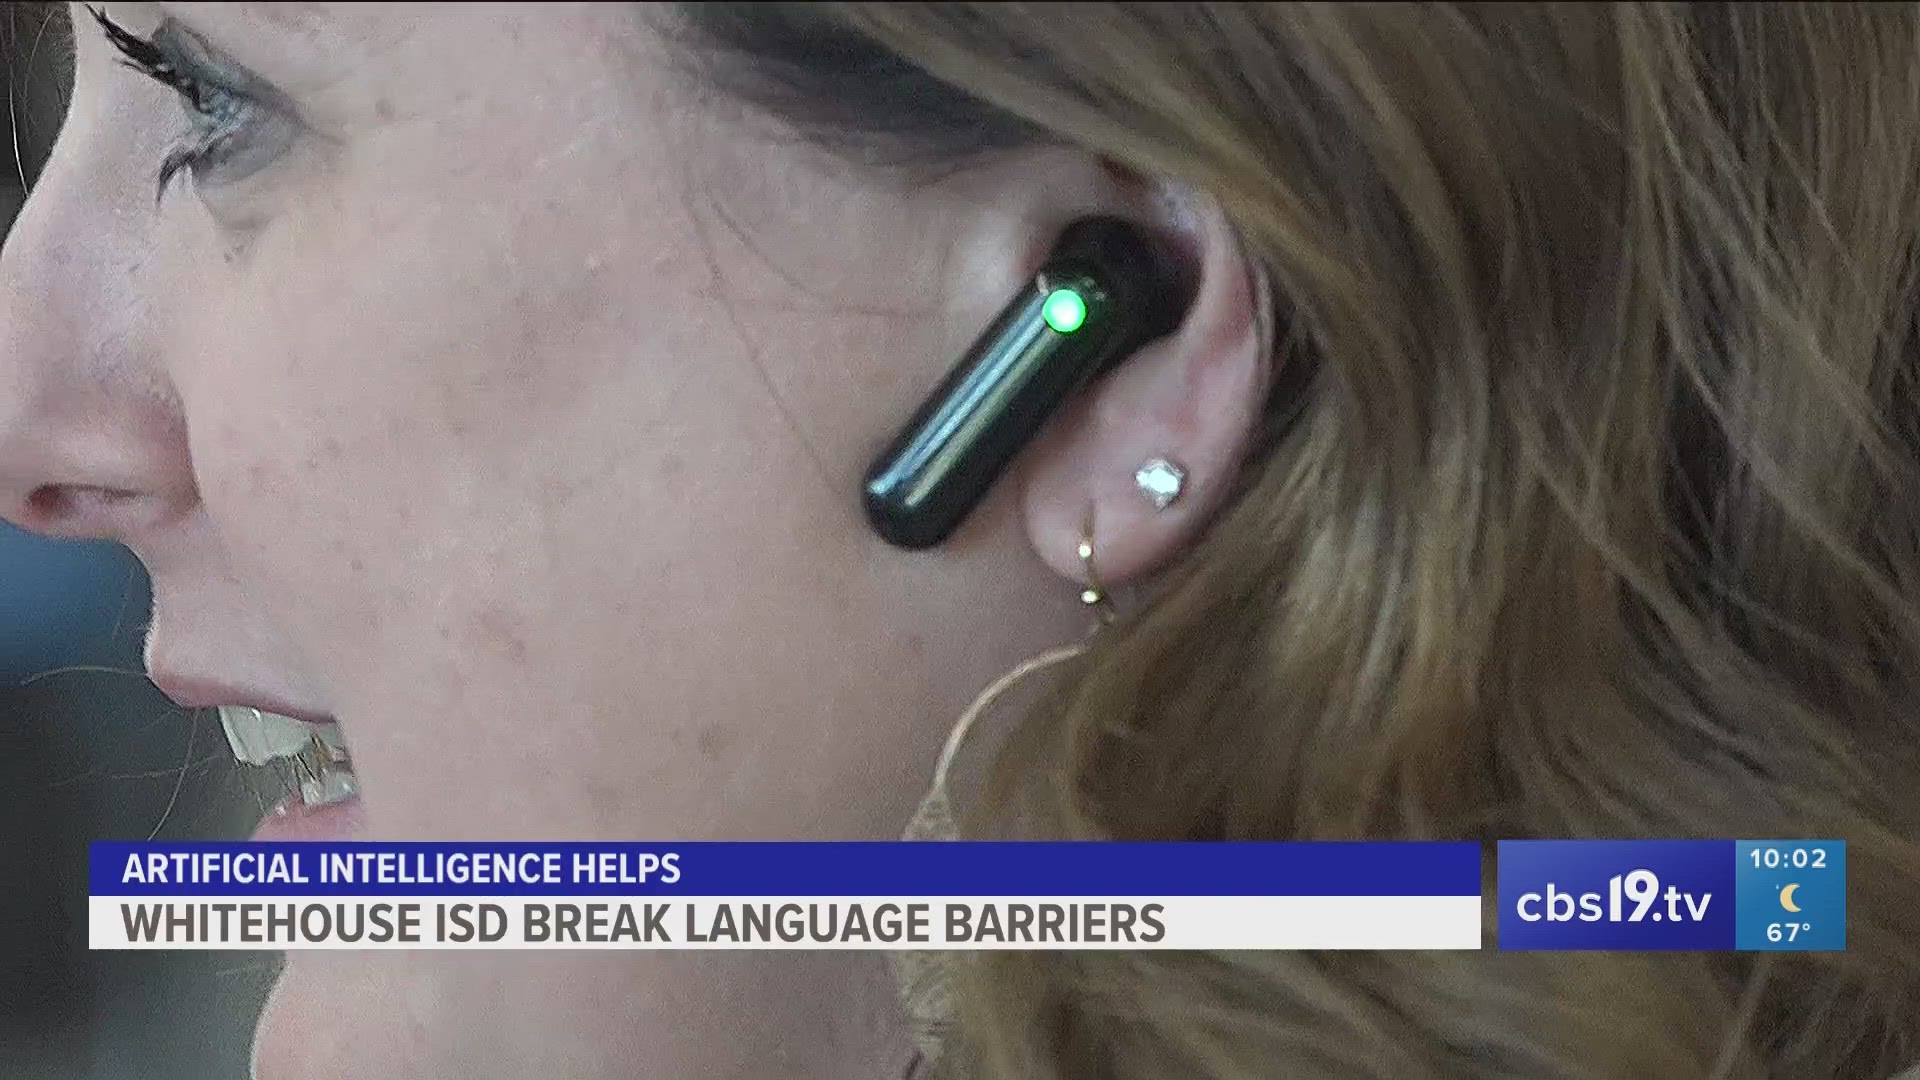 WISD recently purchased language translating earbuds through a local grant of $19,000. They hope to utilize it to help student's who don't speak English learn.